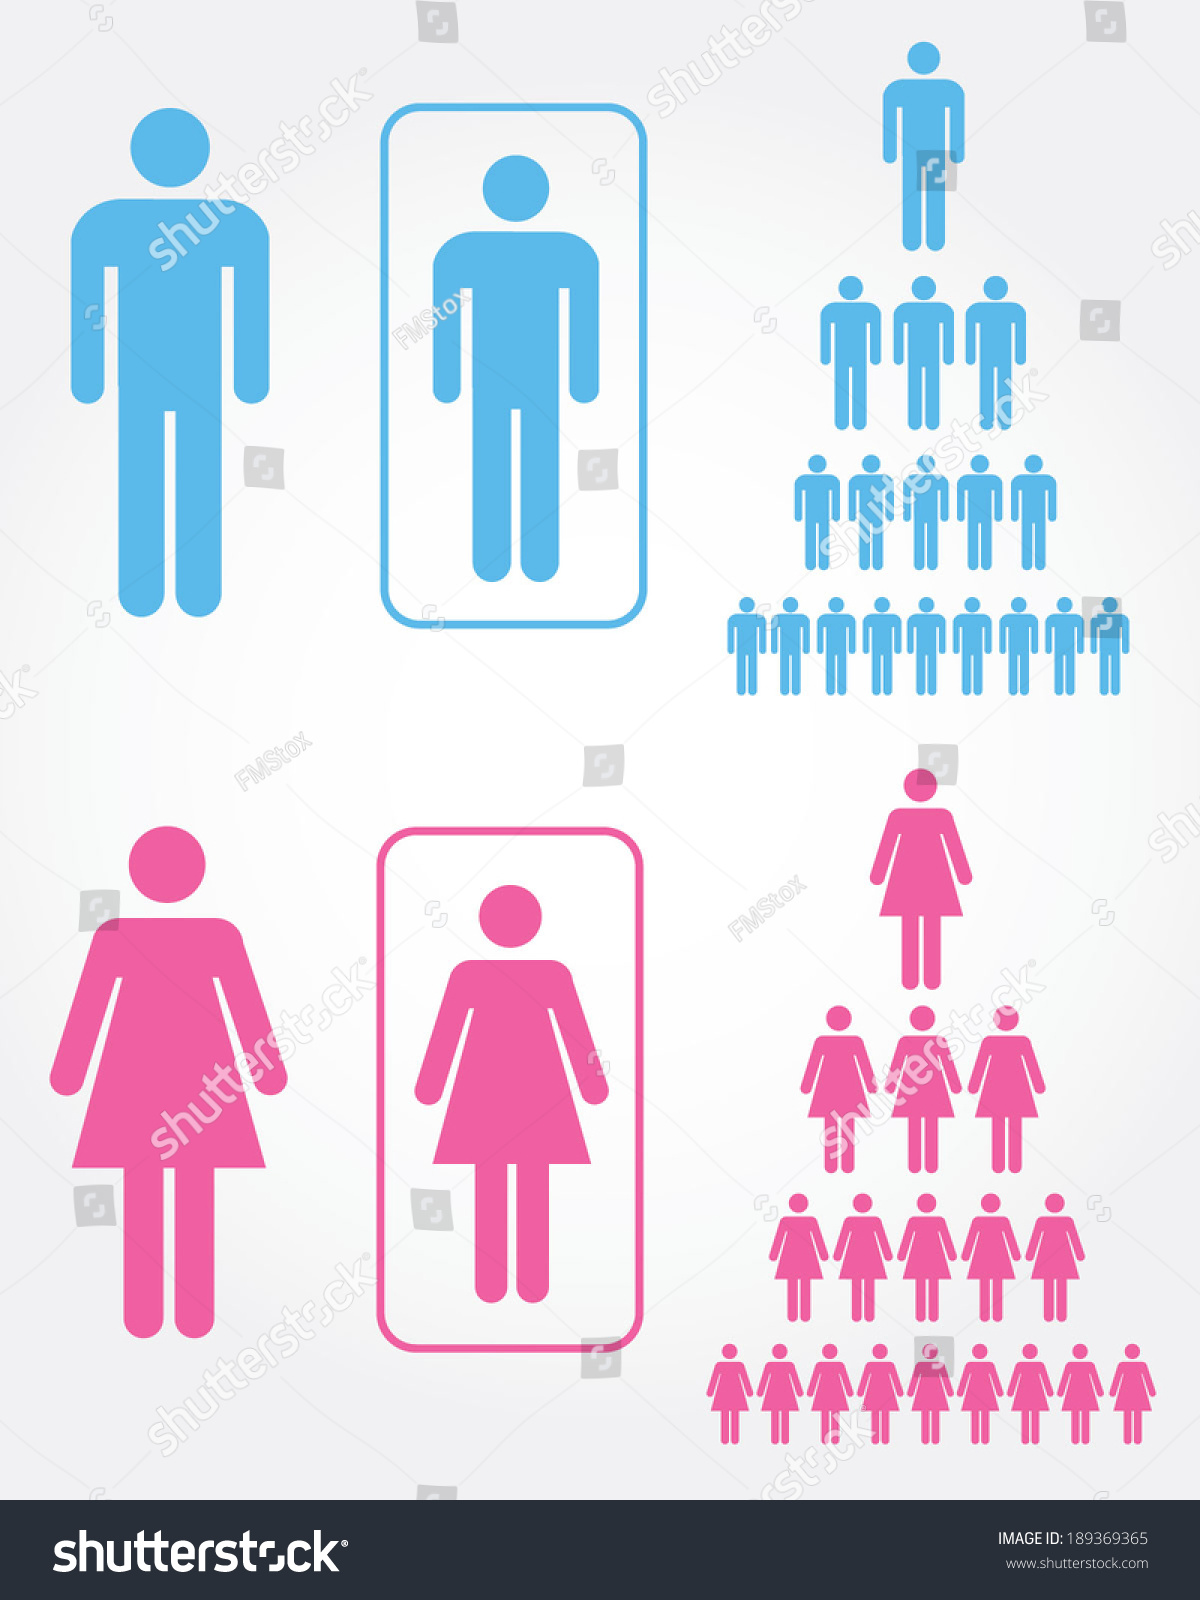 Man And Women Icon Set - Vector - 189369365 : Shutterstock